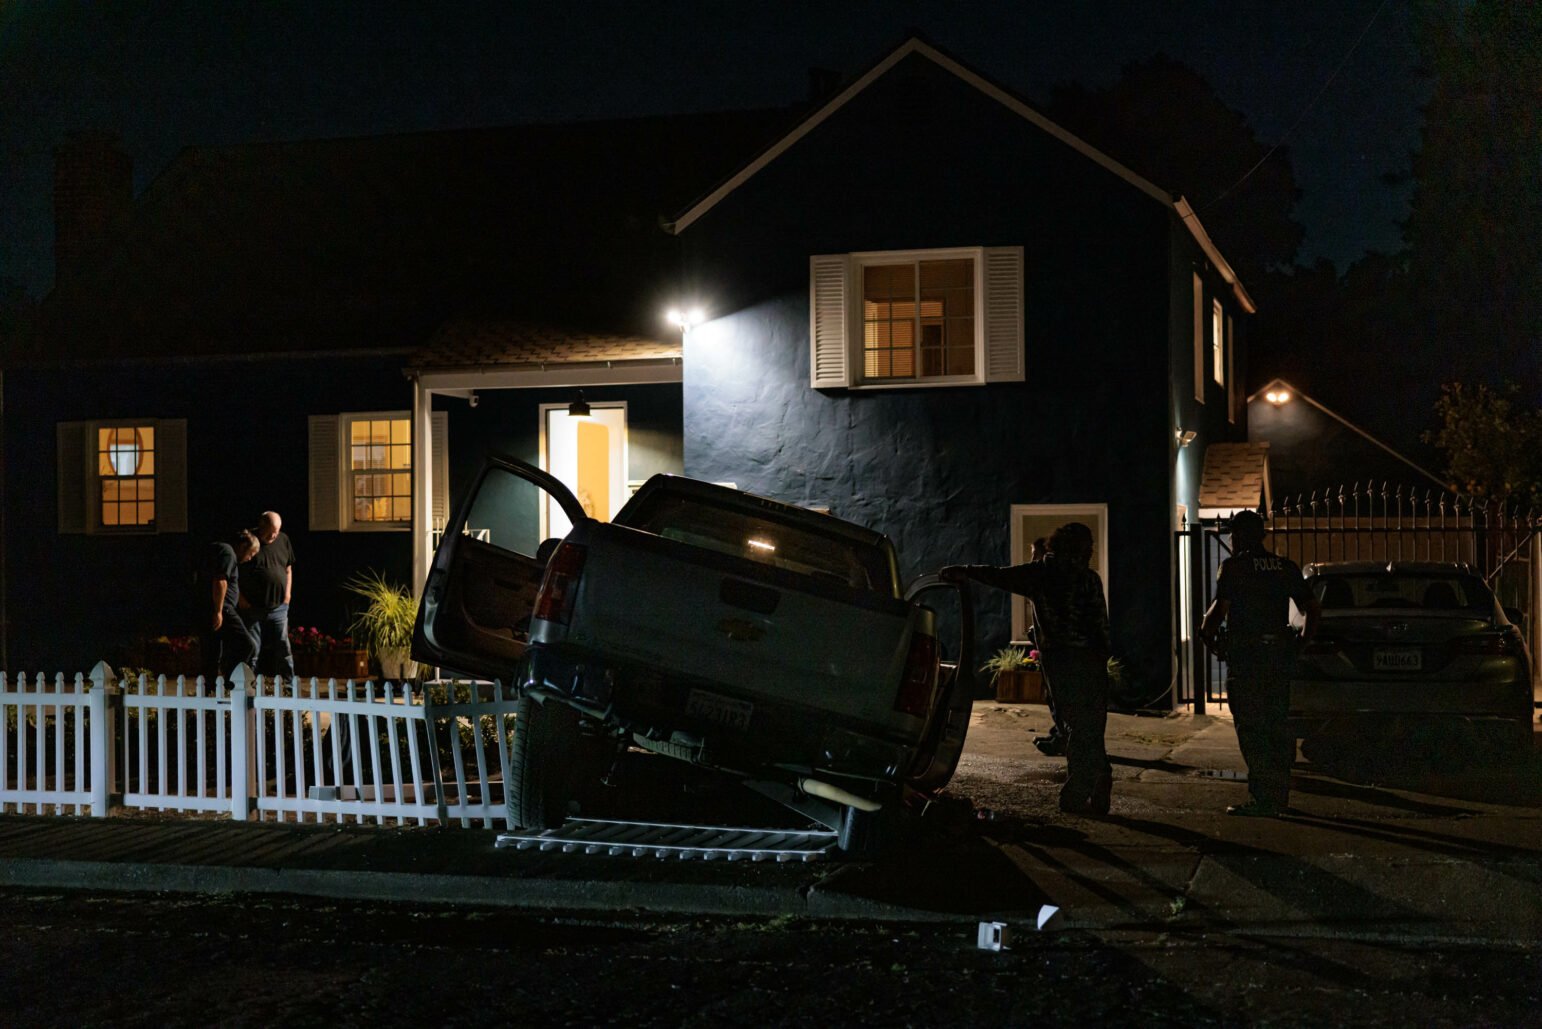 A blue house at night with a silver pickup truck crashed into the white picket fence in front. The truck's front is elevated and appears to be lodged on the fence. Several people, including police officers, are standing near the house, and the area is lit by a porch light and police car lights.